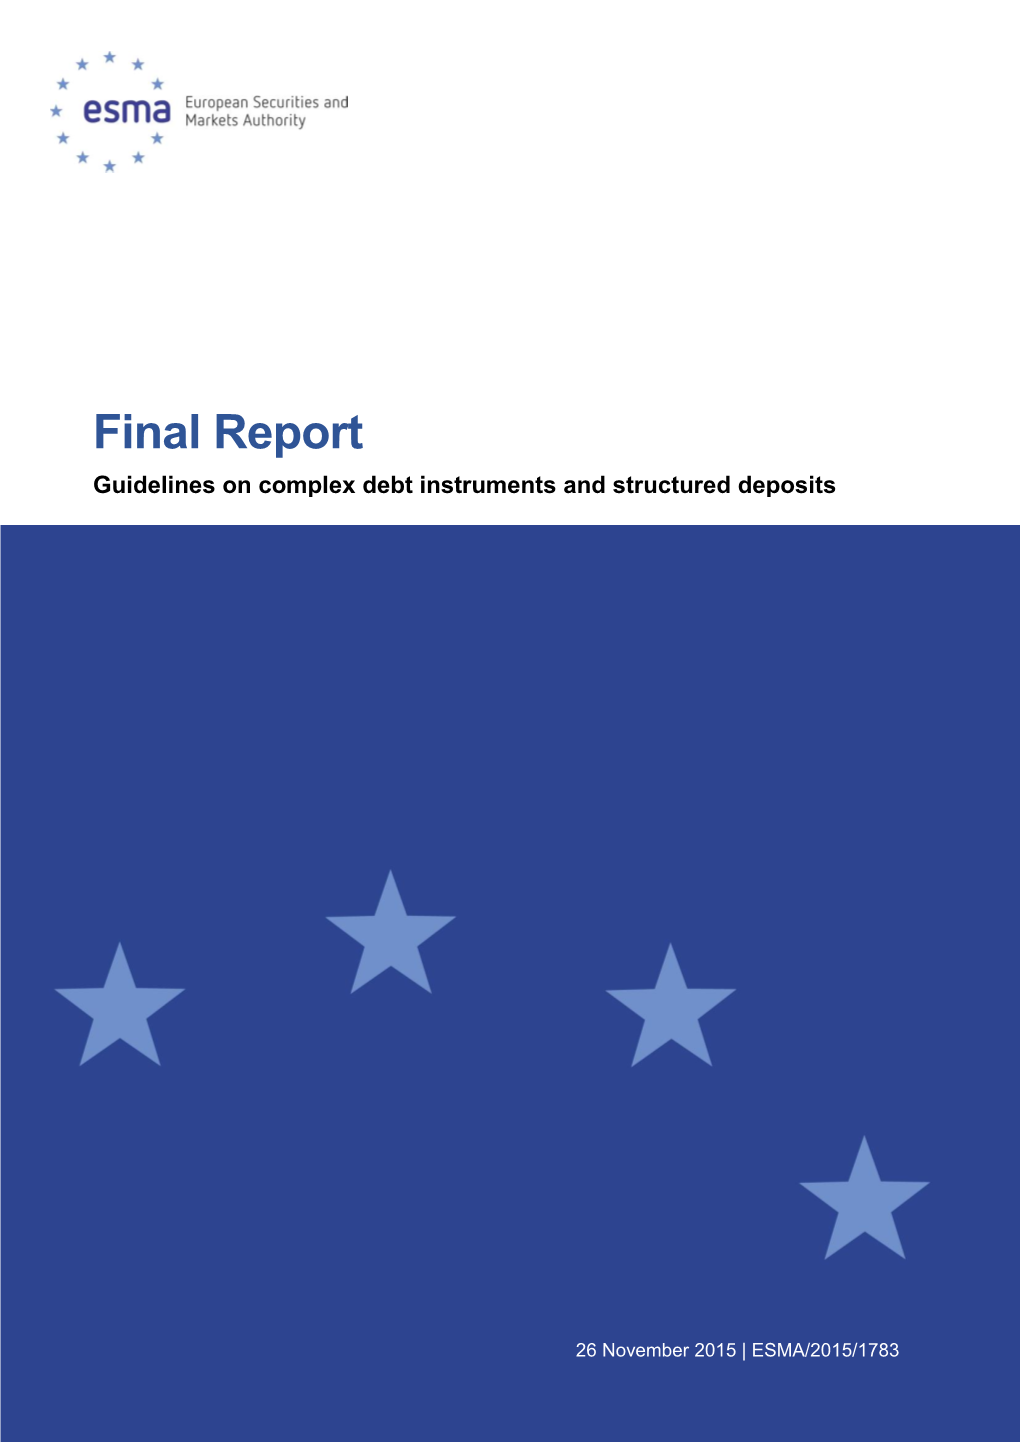 Final Report on Complex Debt Instruments and Structured Deposits